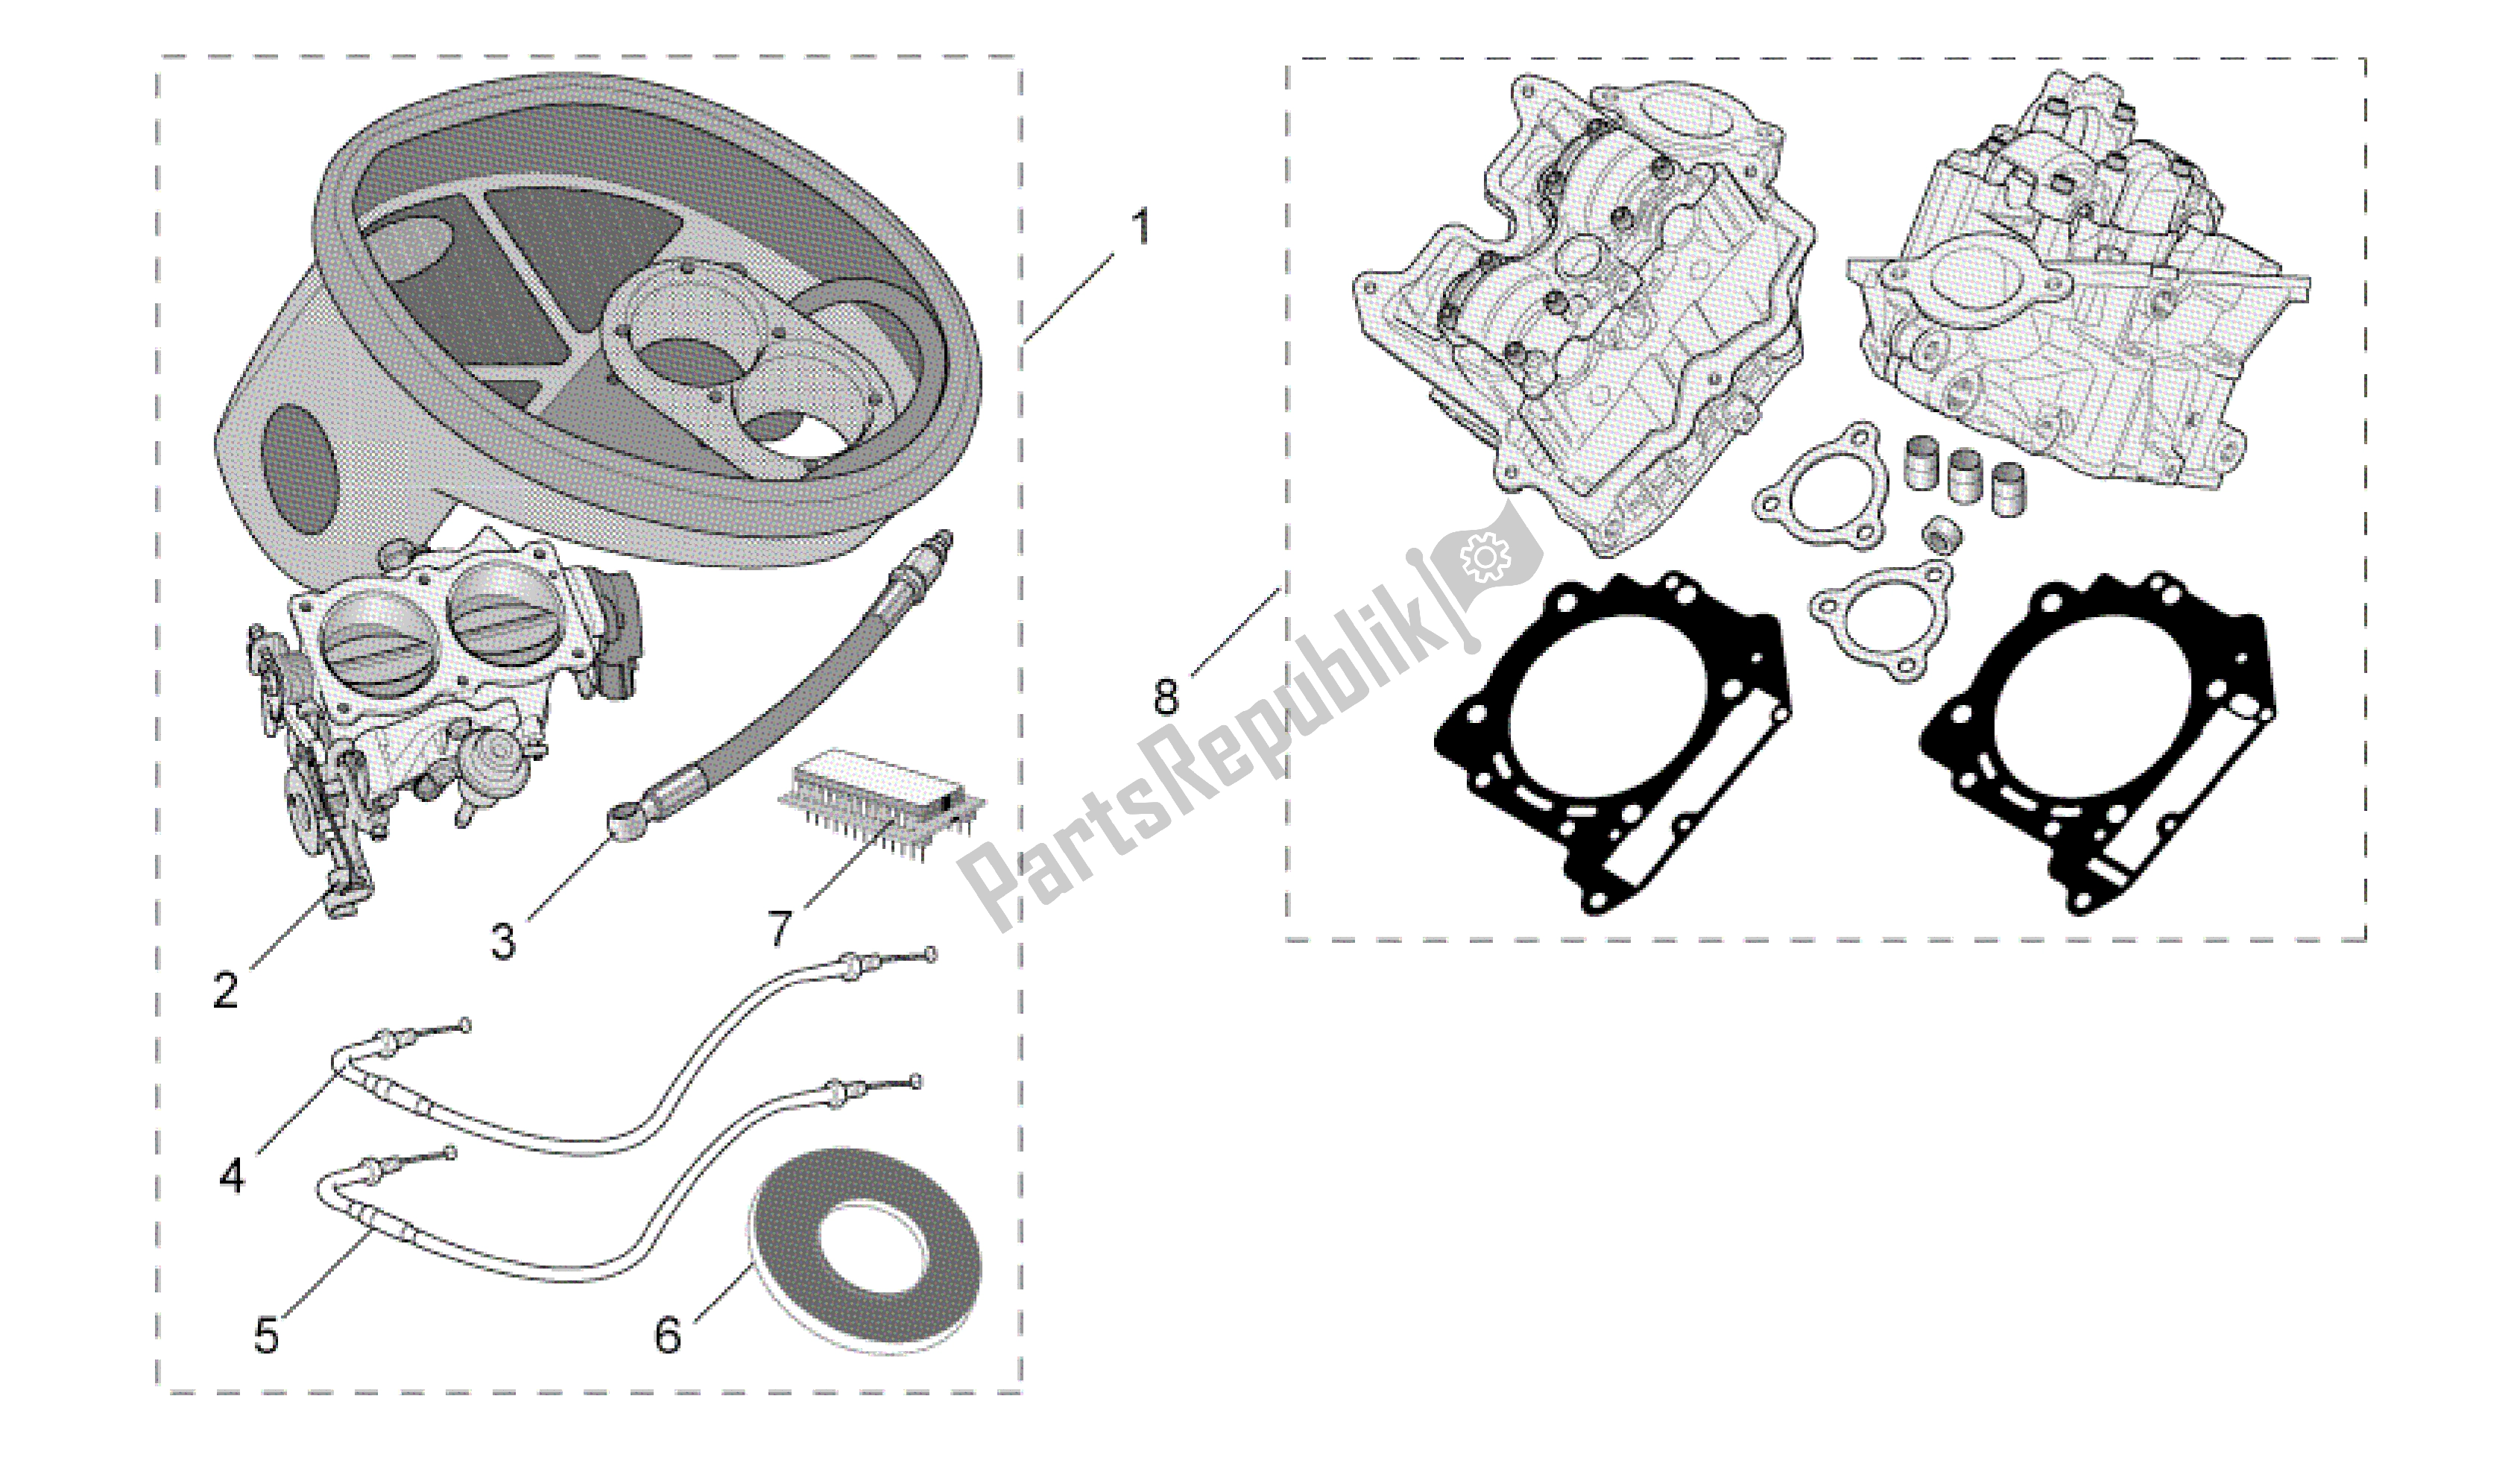 All parts for the Acc. - Performance Parts Iv of the Aprilia RSV Mille R 3963 1000 2003